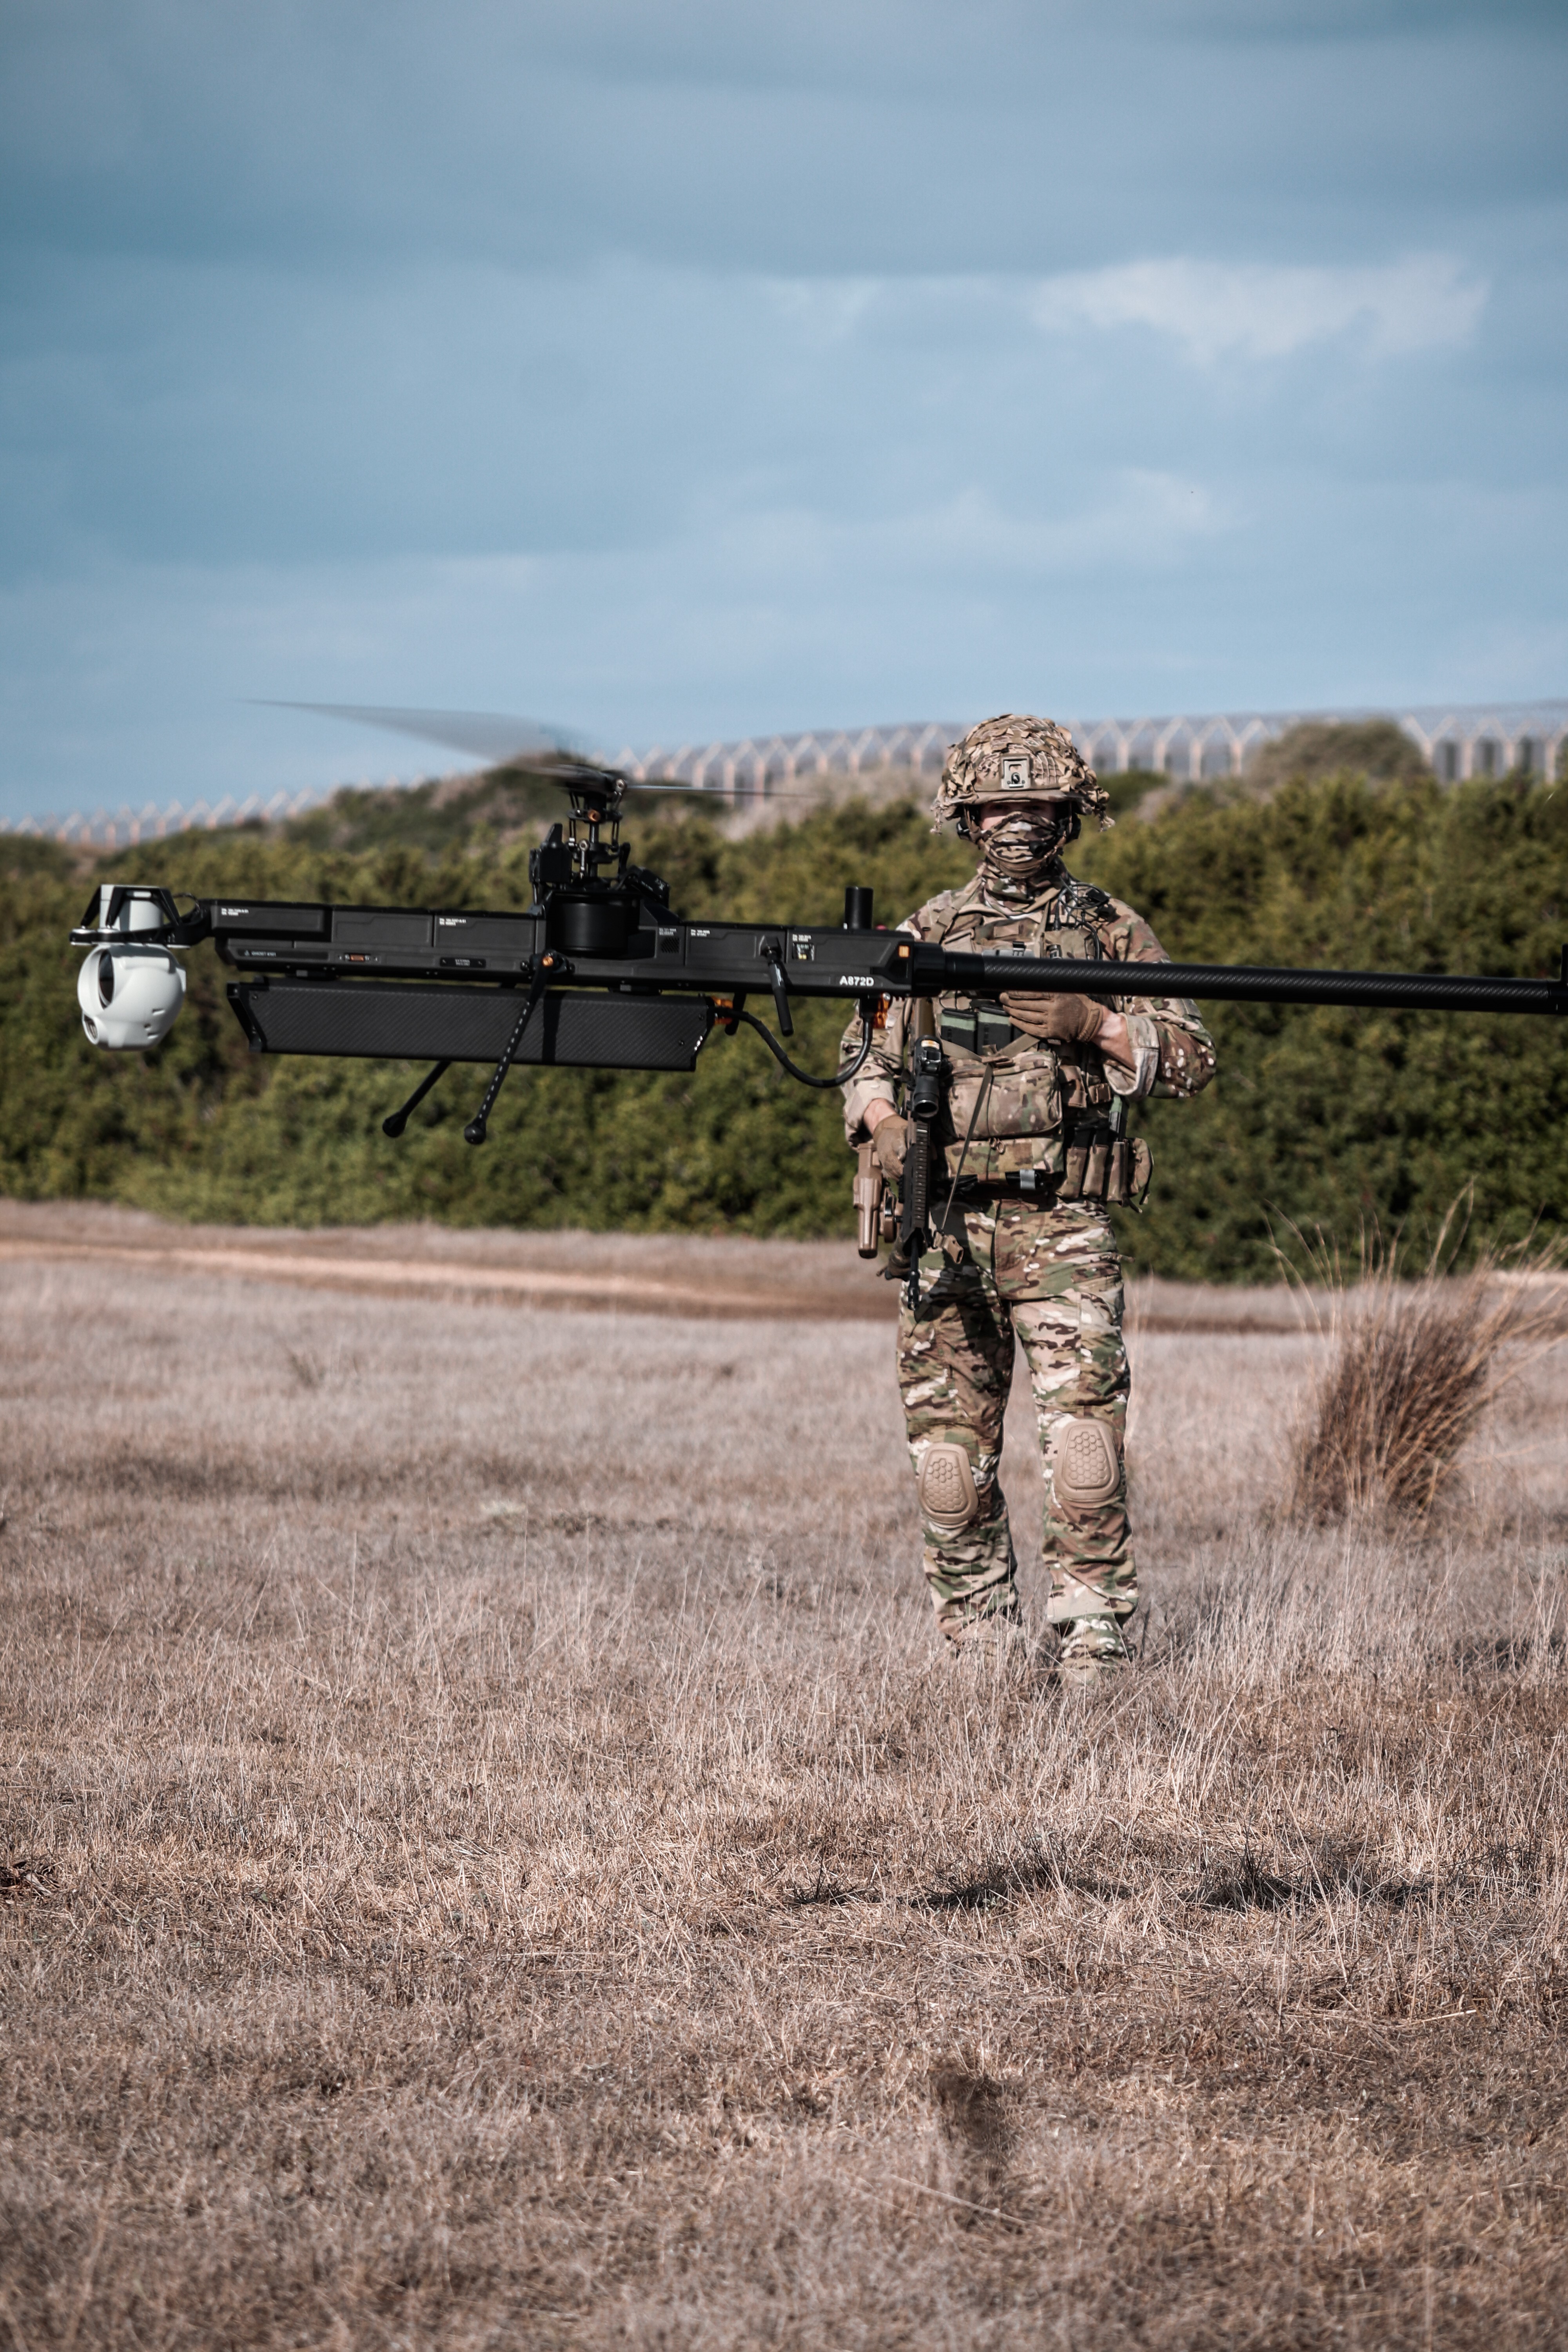 15 Squadron RAF Regiment have been conducting experimentation with the Andruil Ghost RPAS